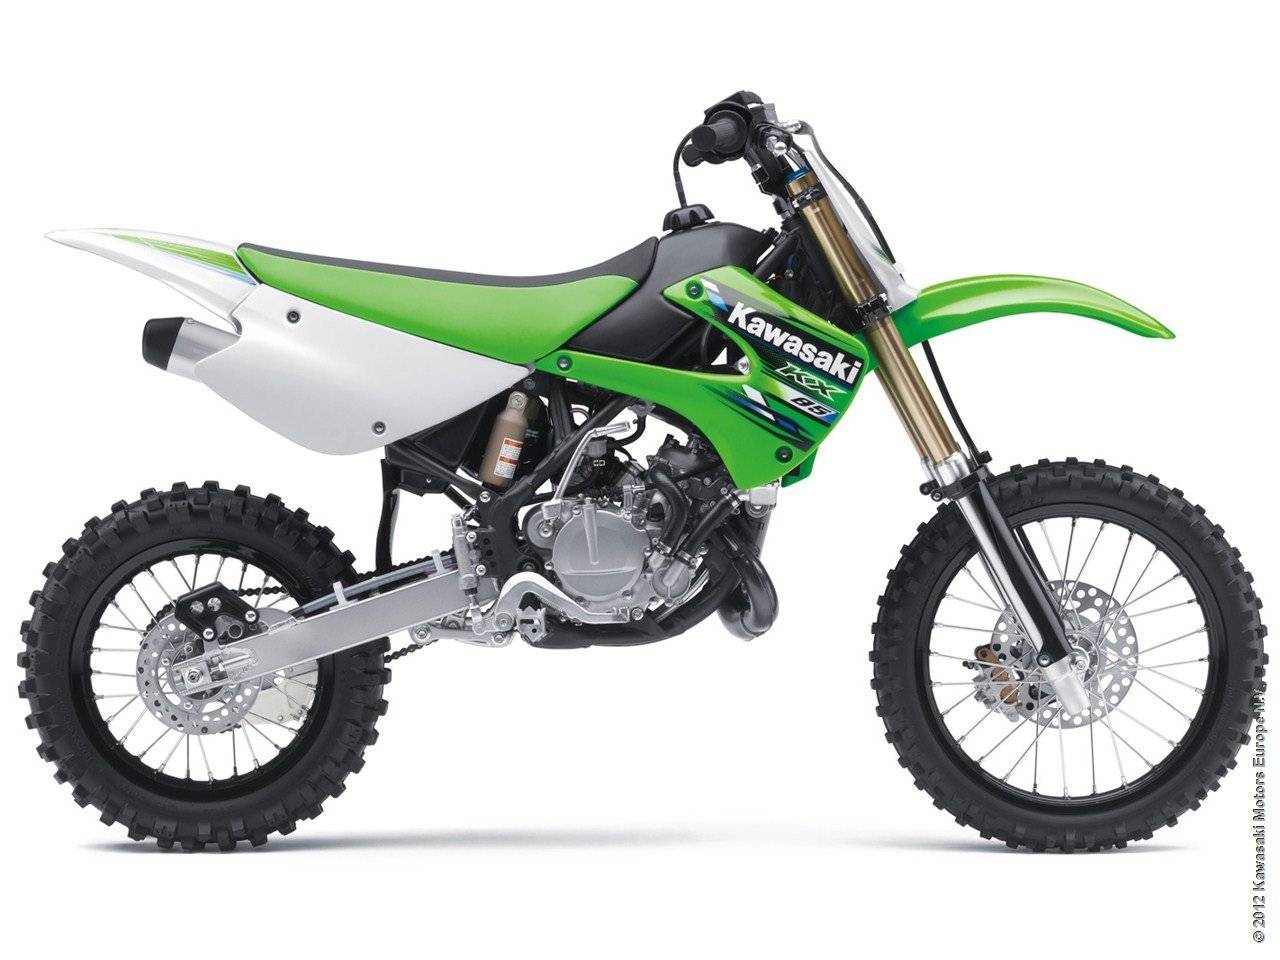 Top speed of a kx 85